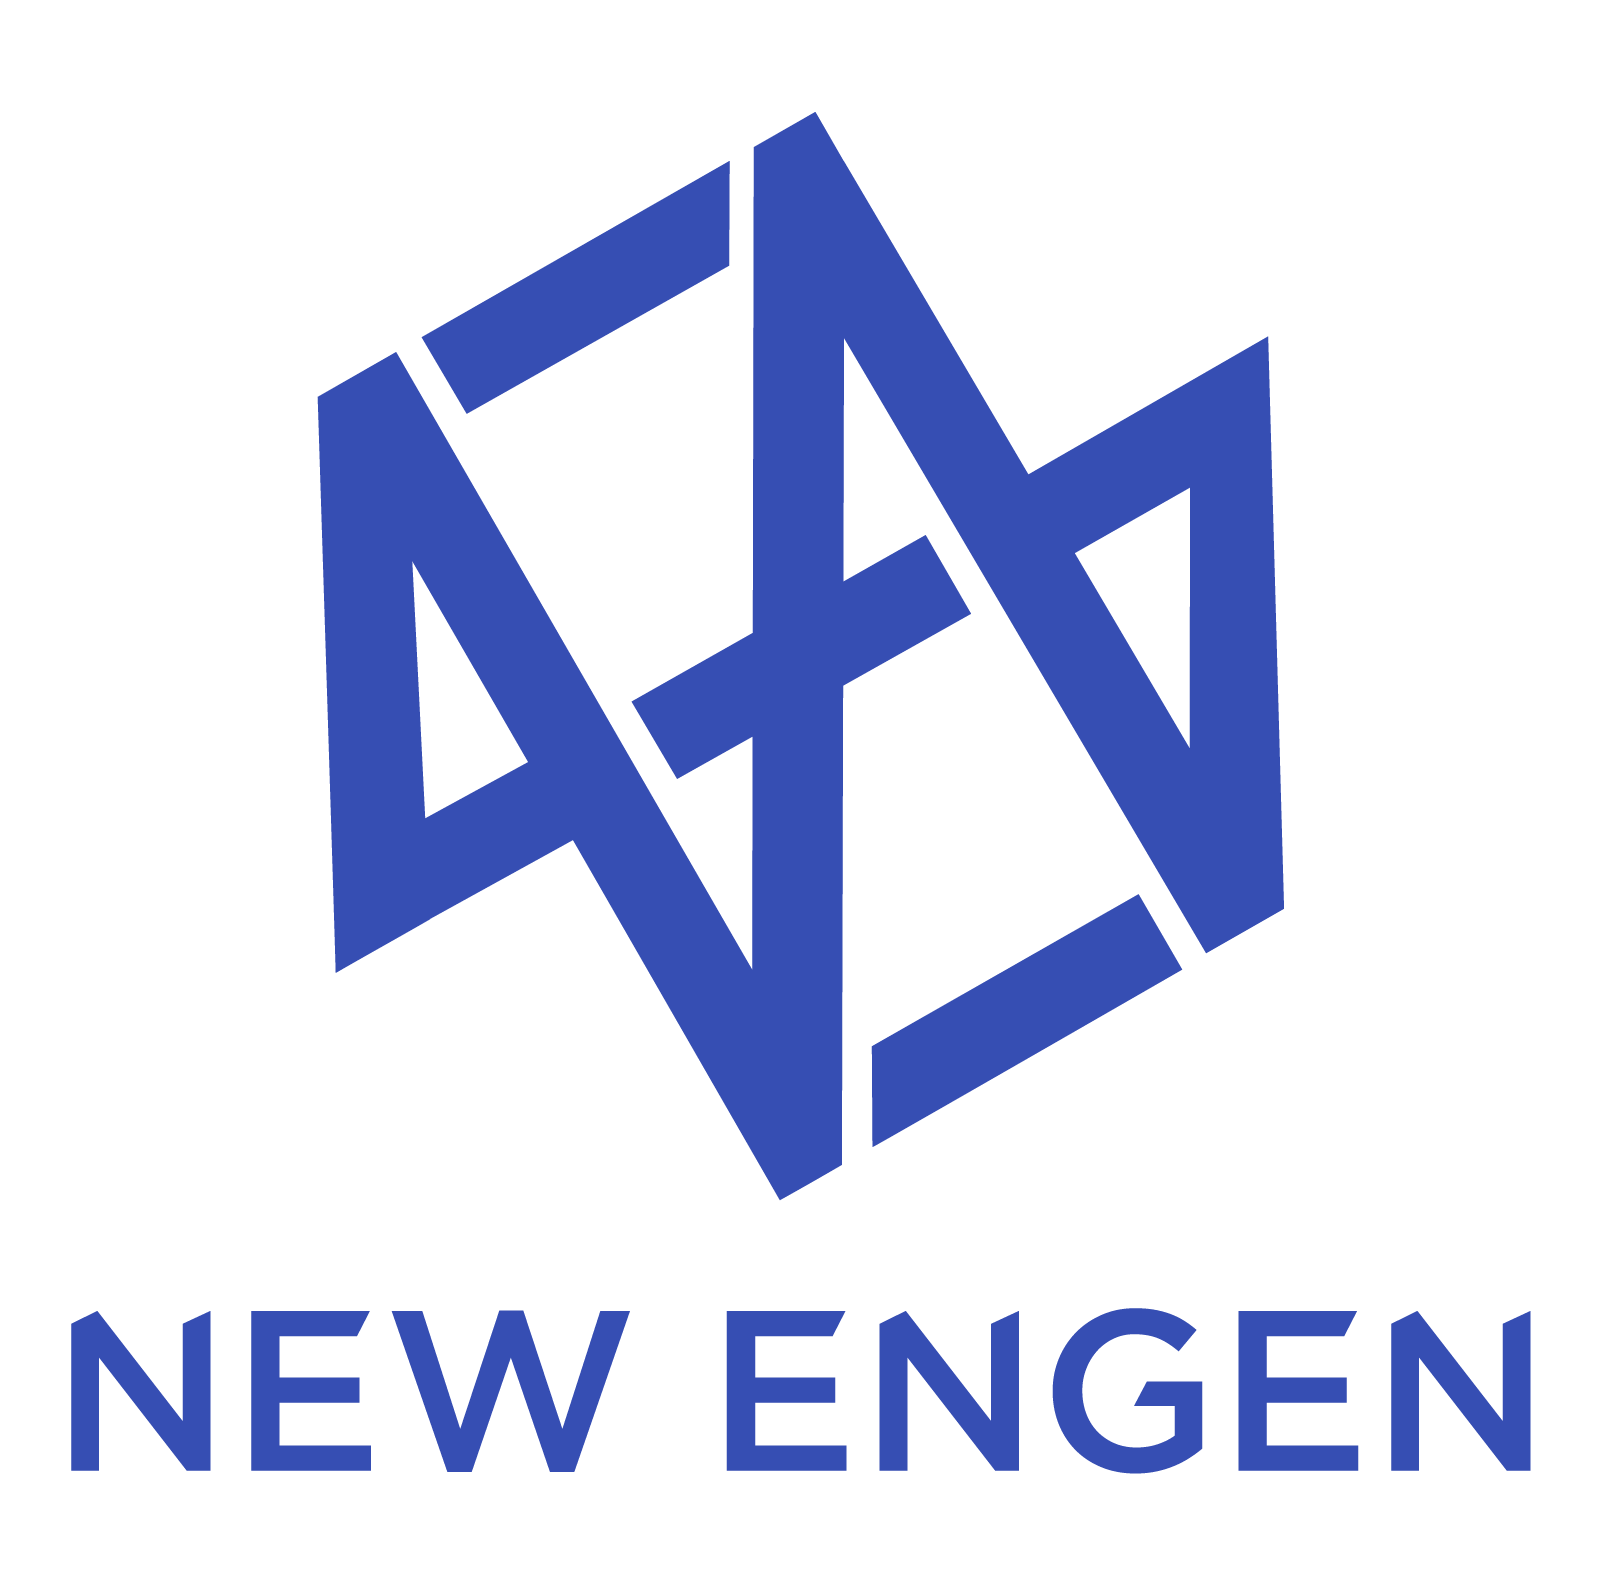 Acorn Influence, a New Engen Company, Launches Industry’s First Proven “Performance Creator” Solution 